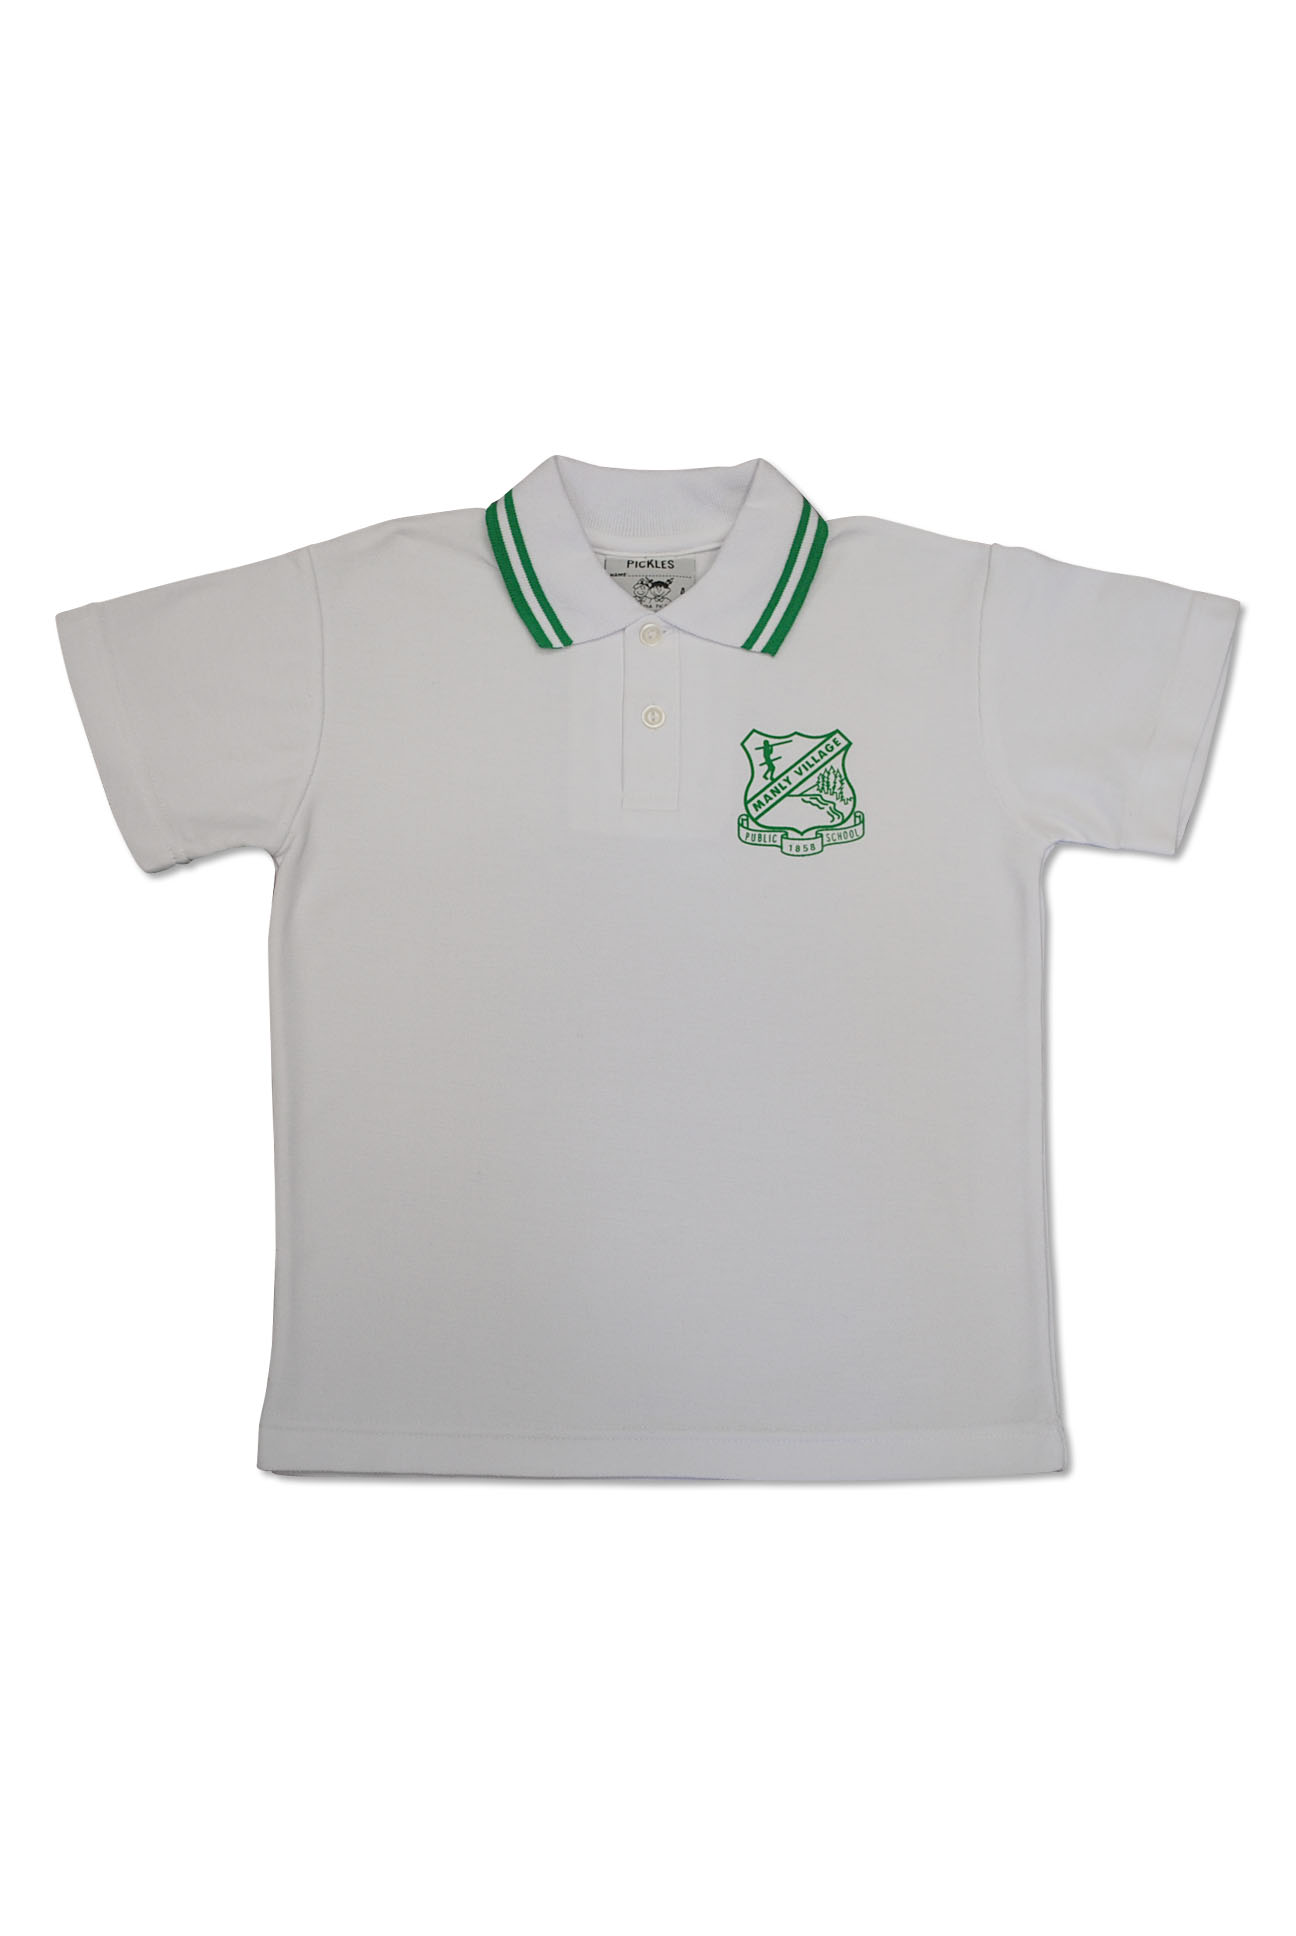 Manly Village Unisex White Short Sleeve Polo Shirt | Shop at Pickles ...